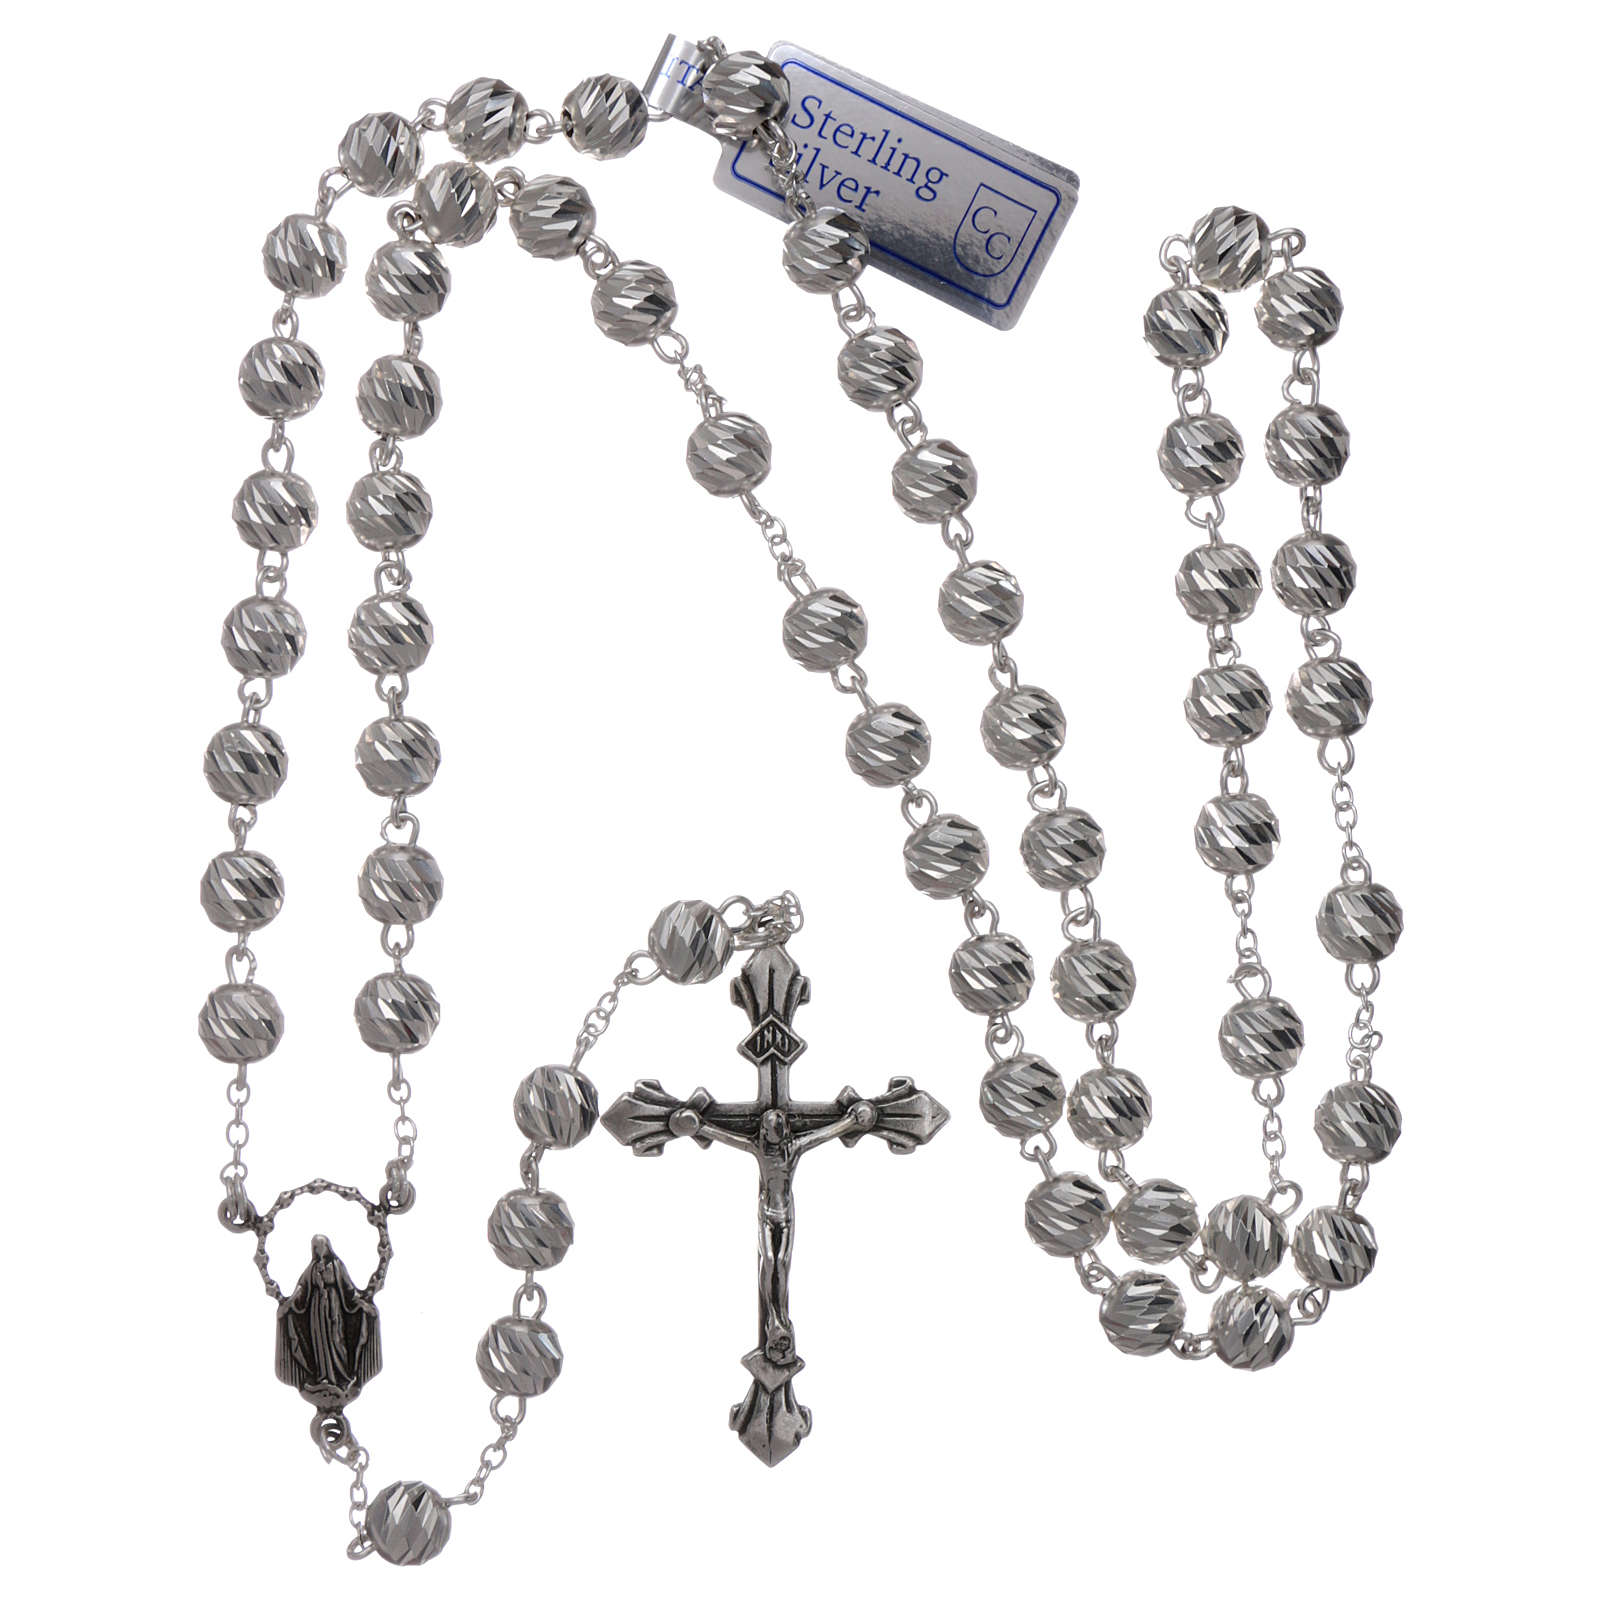 Gift Boxed Malachy O'More Center and 1 3/8 x 3/4 inch Crucifix Malachy O'More Rosary with 6mm Zircon Color Fire Polished Beads Silver Finish St St 